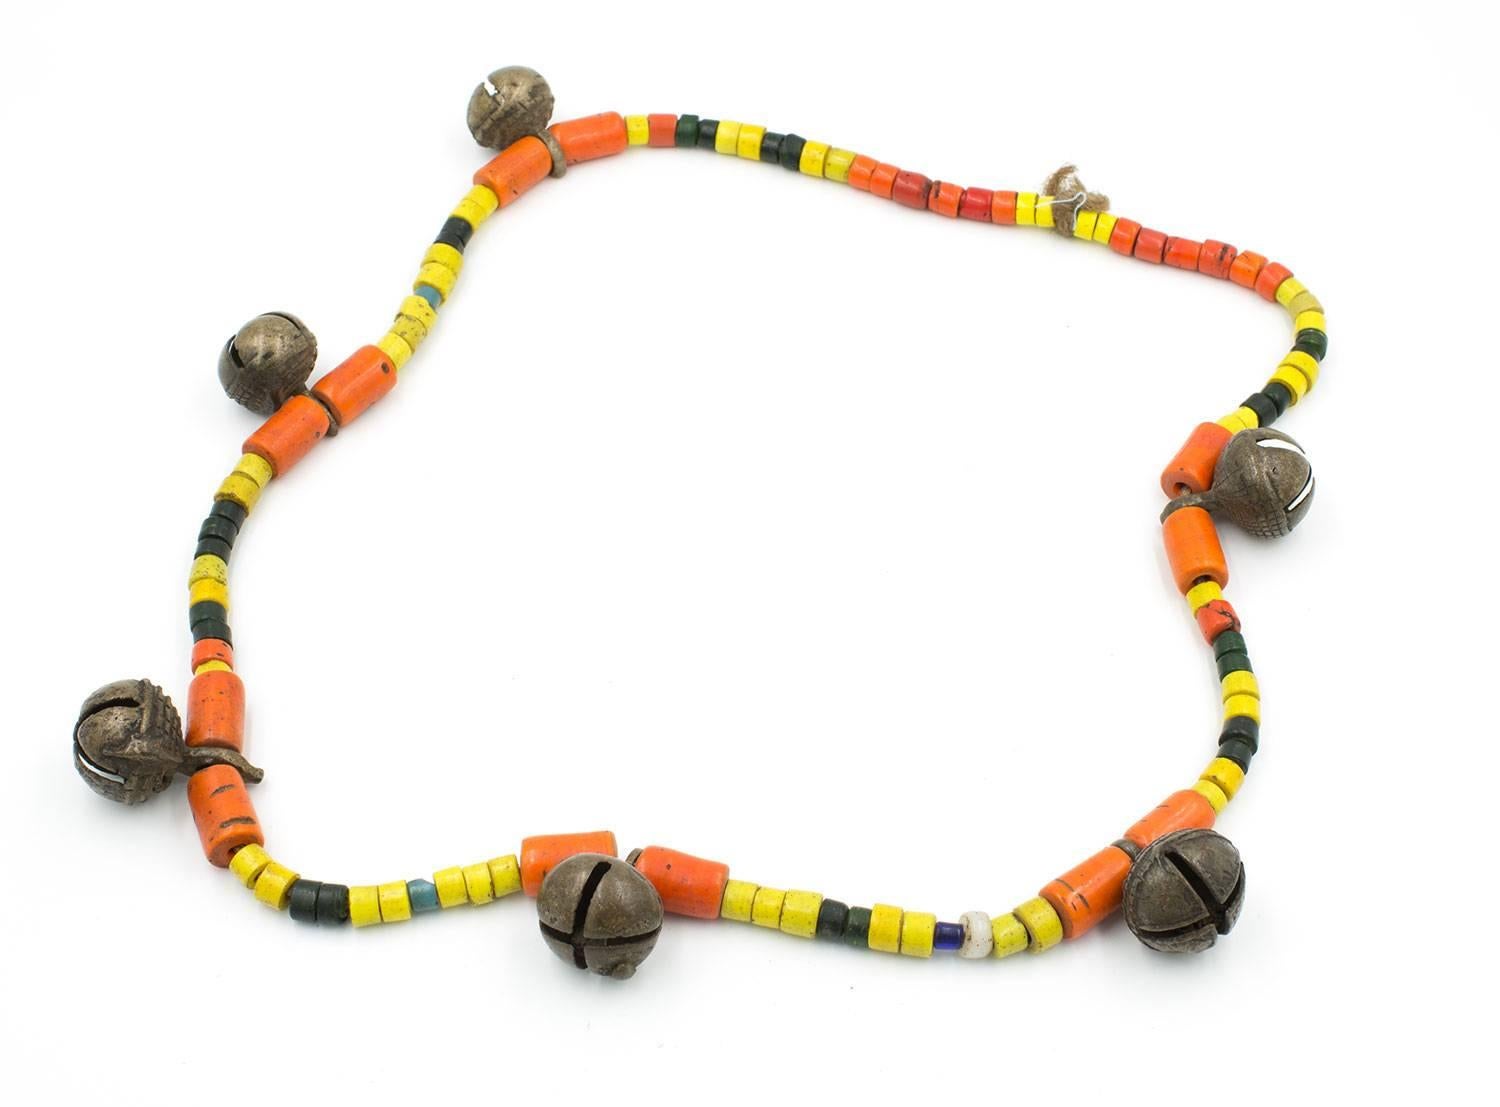 The beads and bronze bells on this necklace are old and have great patina. This is an authentic tribal necklace from the Naga tribe.